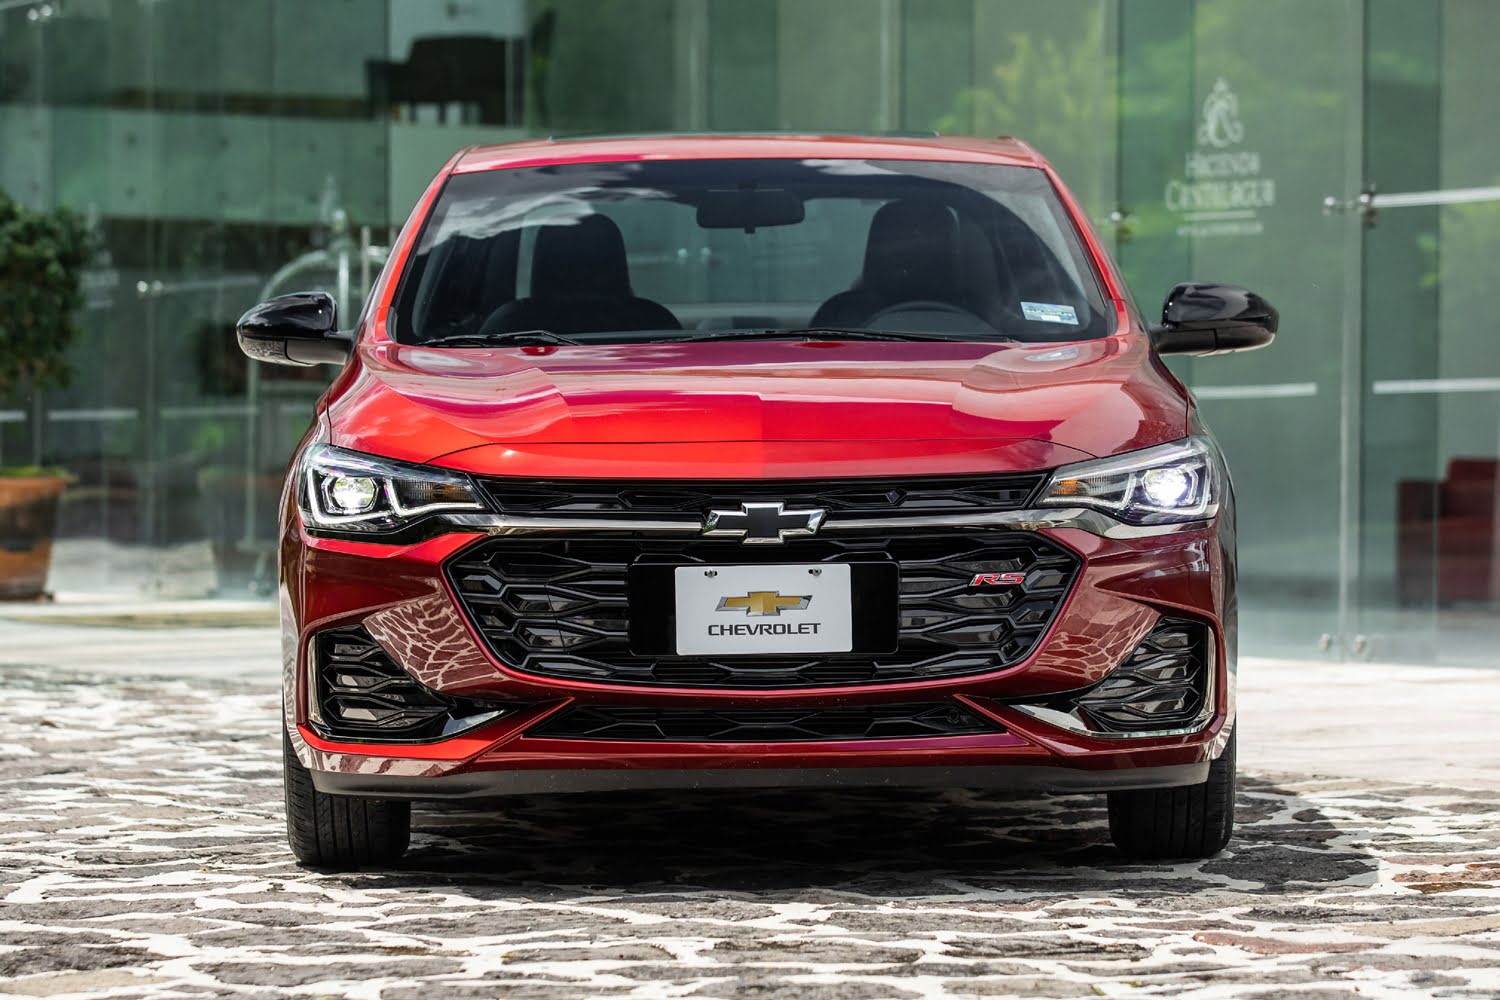 The New 2022 Chevy Cavalier Turbo Launches In Mexico